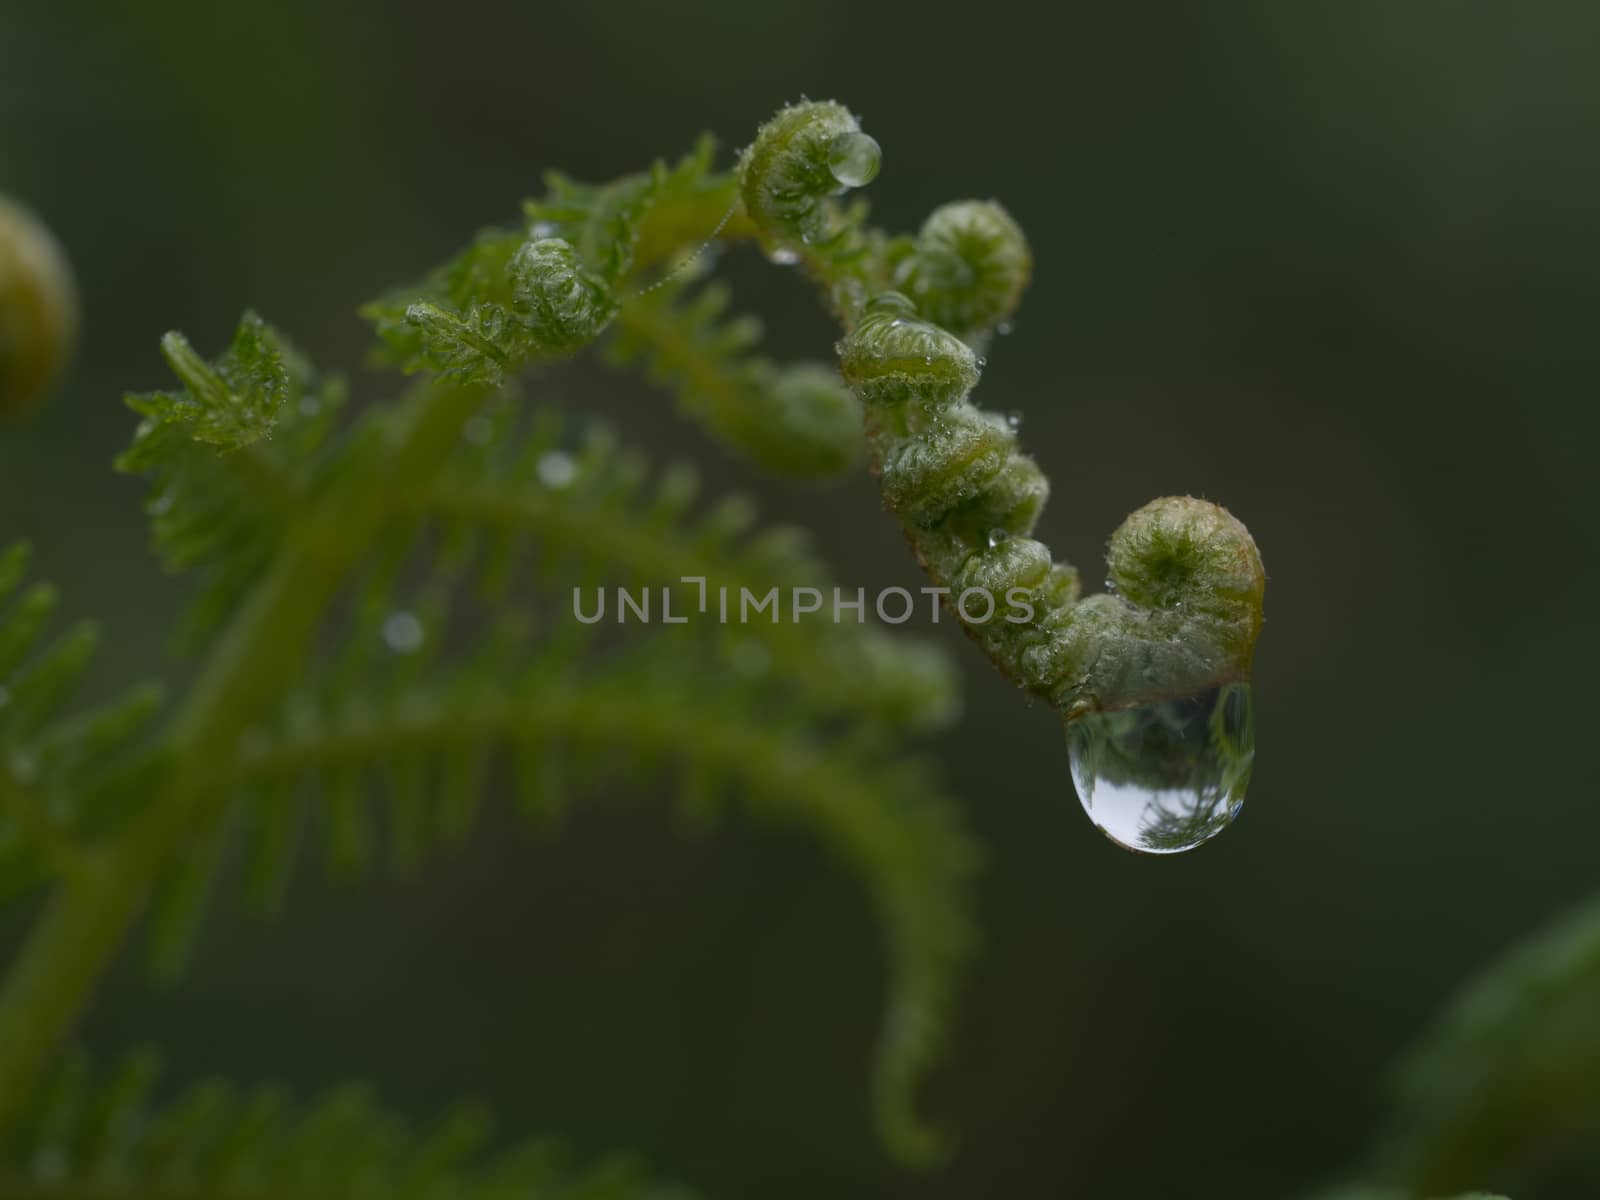 macro photography of green fern with water drop by jmagfoto